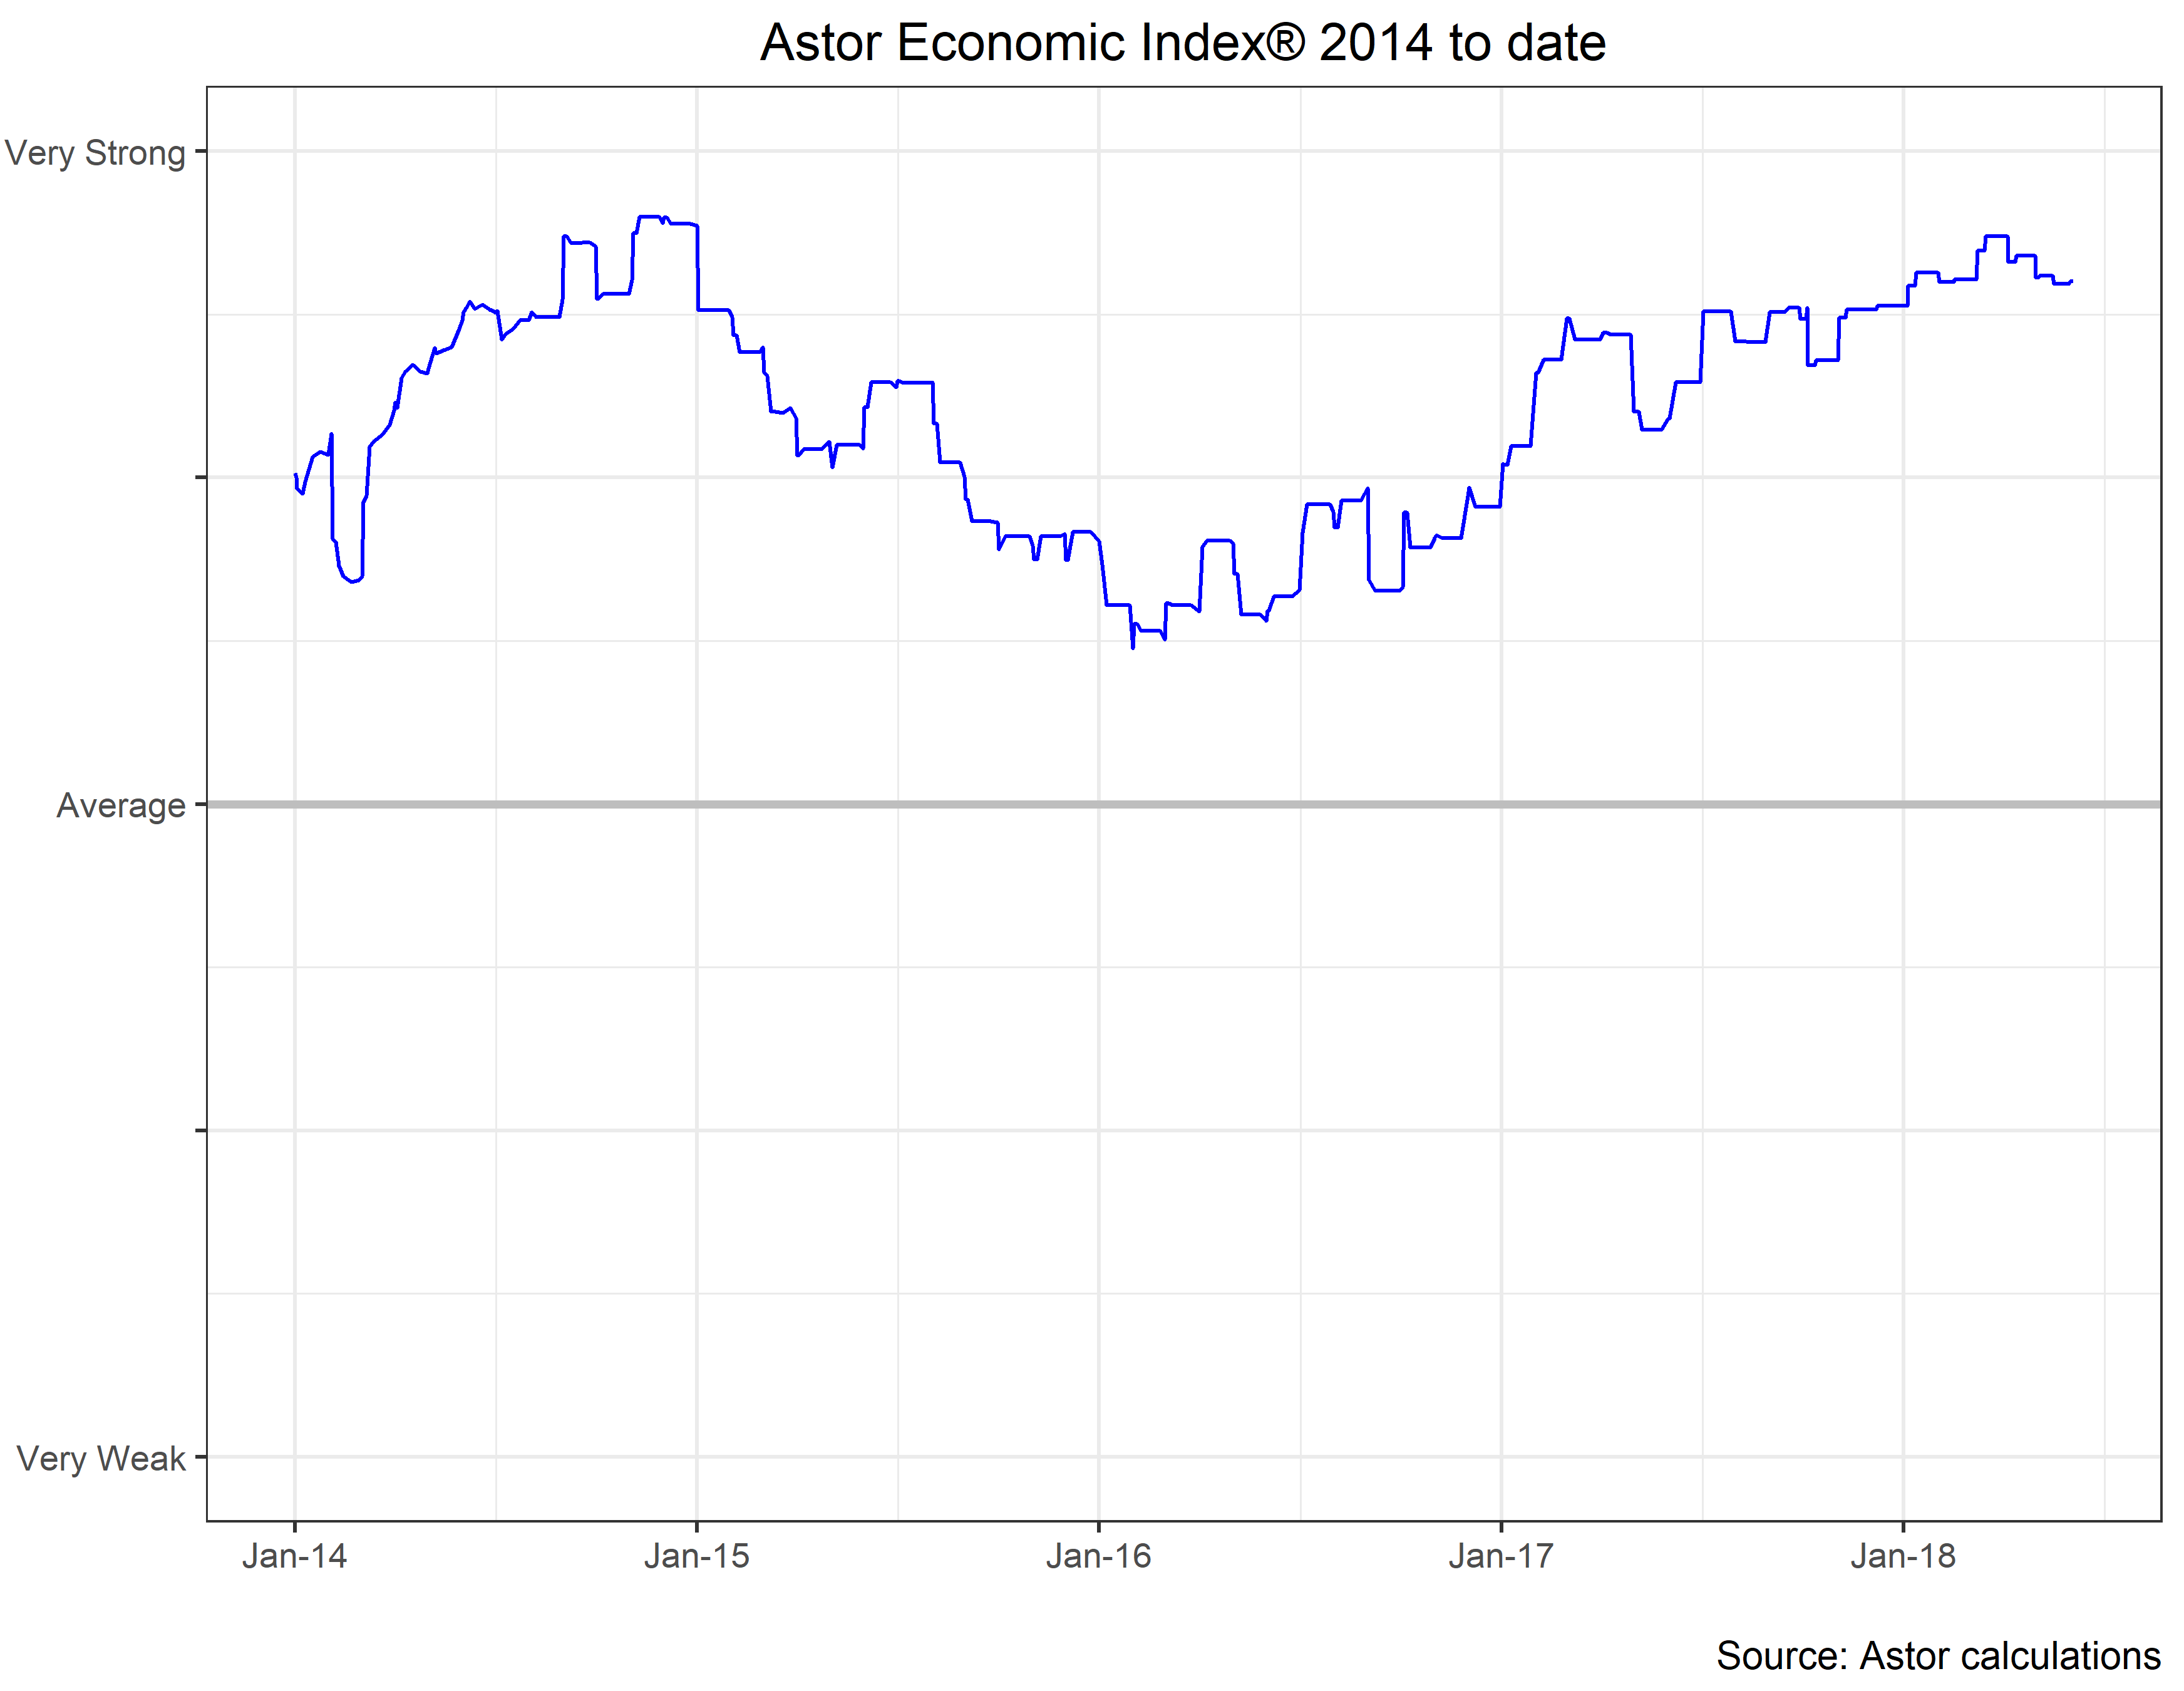 Astor Economic Index 2014 to Date chart